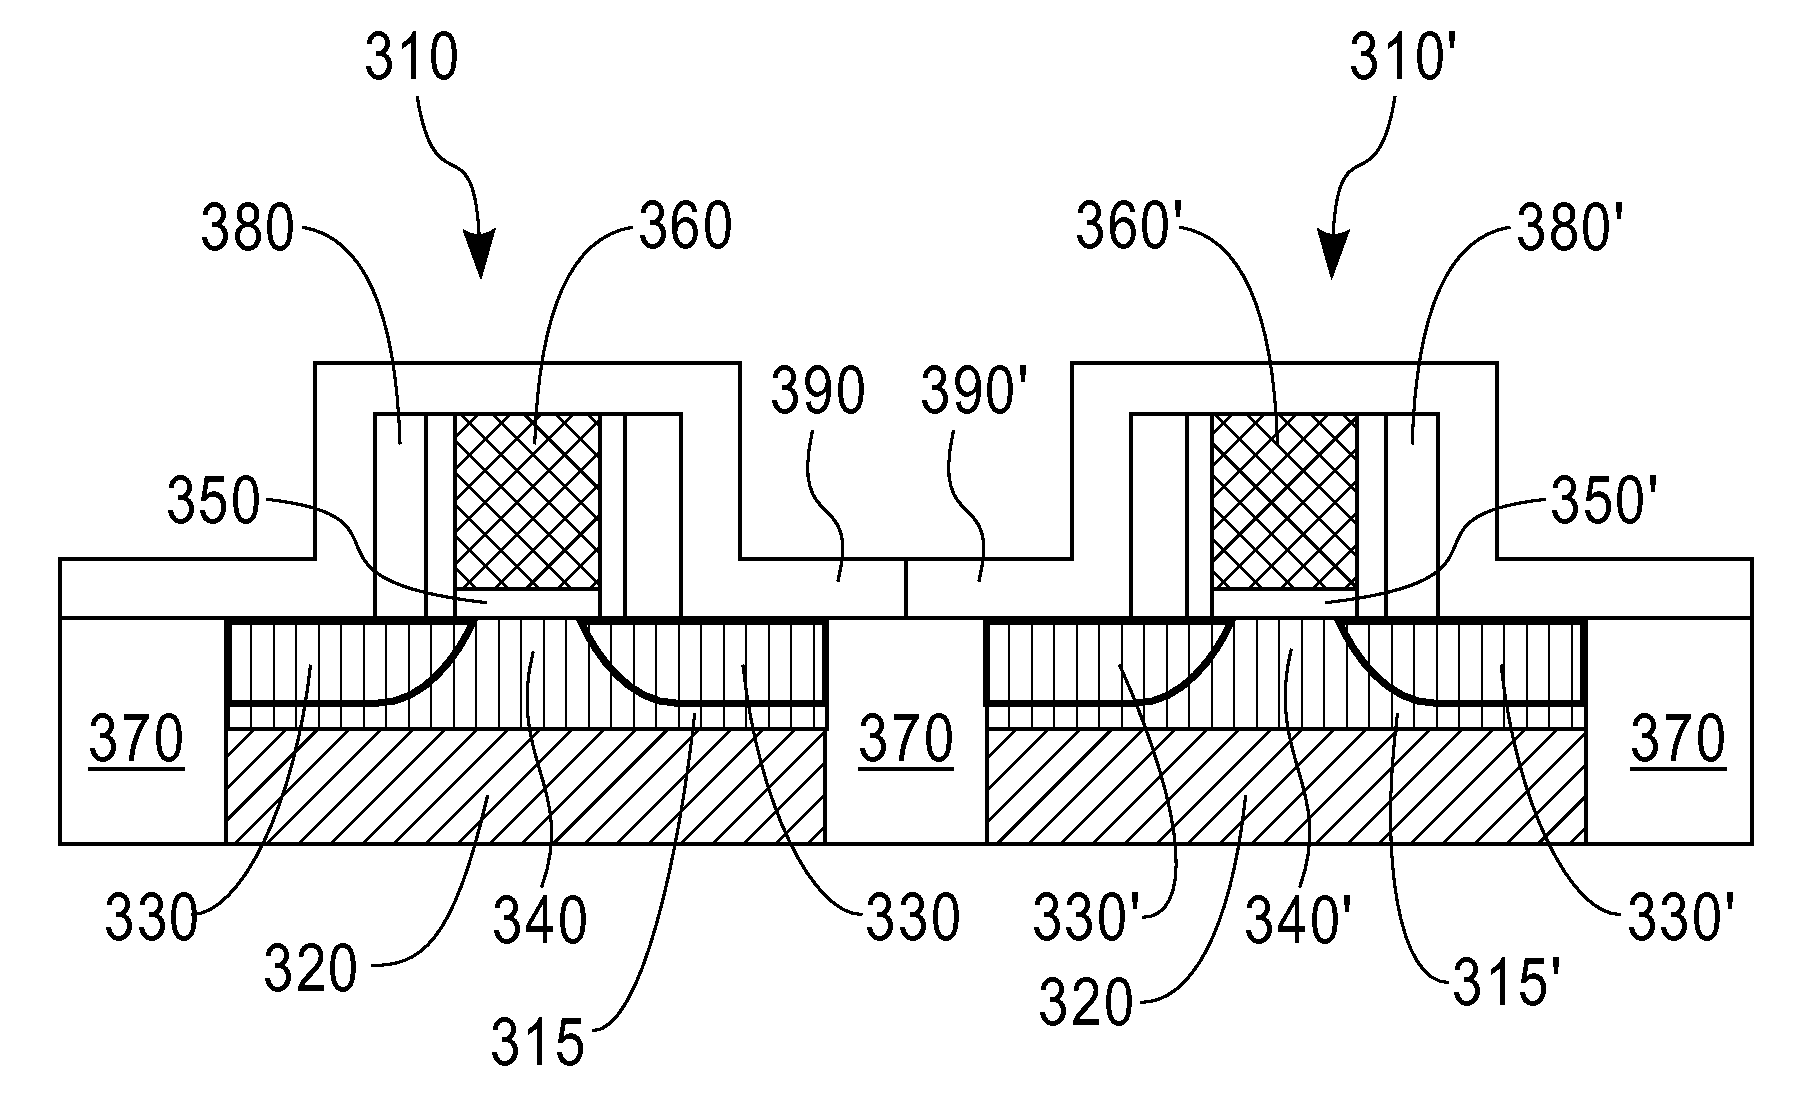 Strained-channel fet comprising twist-bonded semiconductor layer